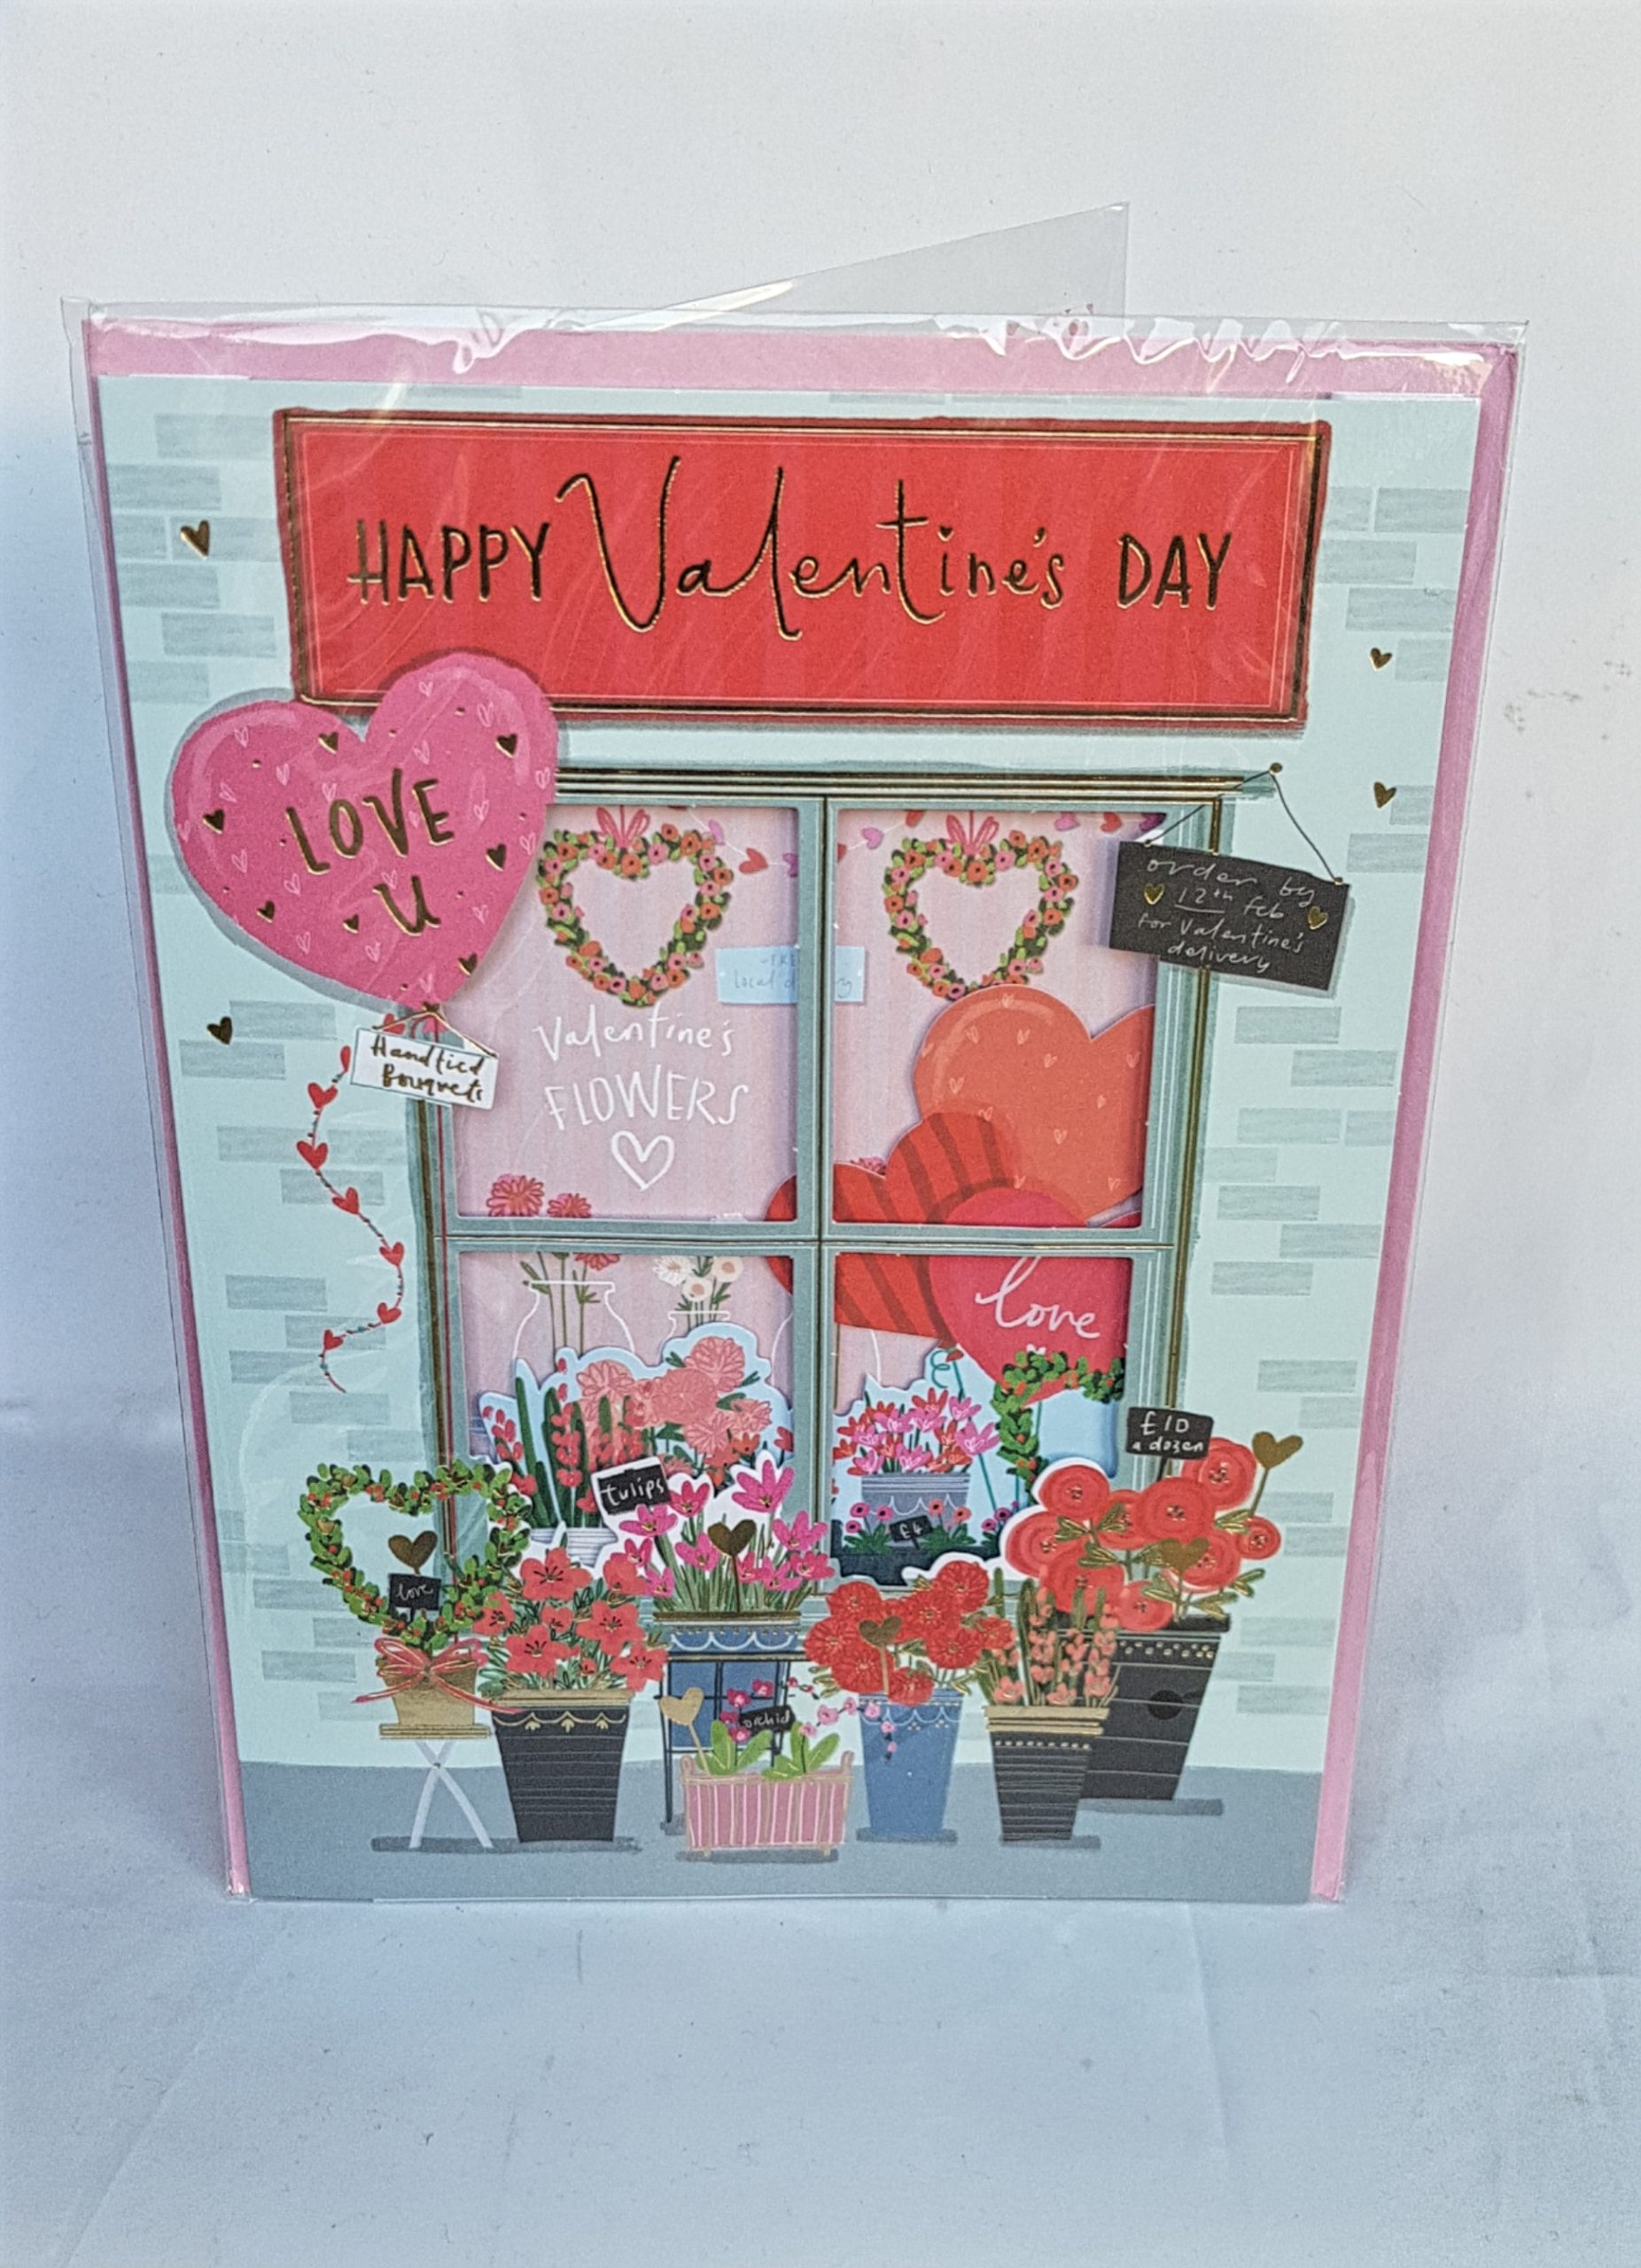 Happy Valentine's Day Card with Flower Shop Detail